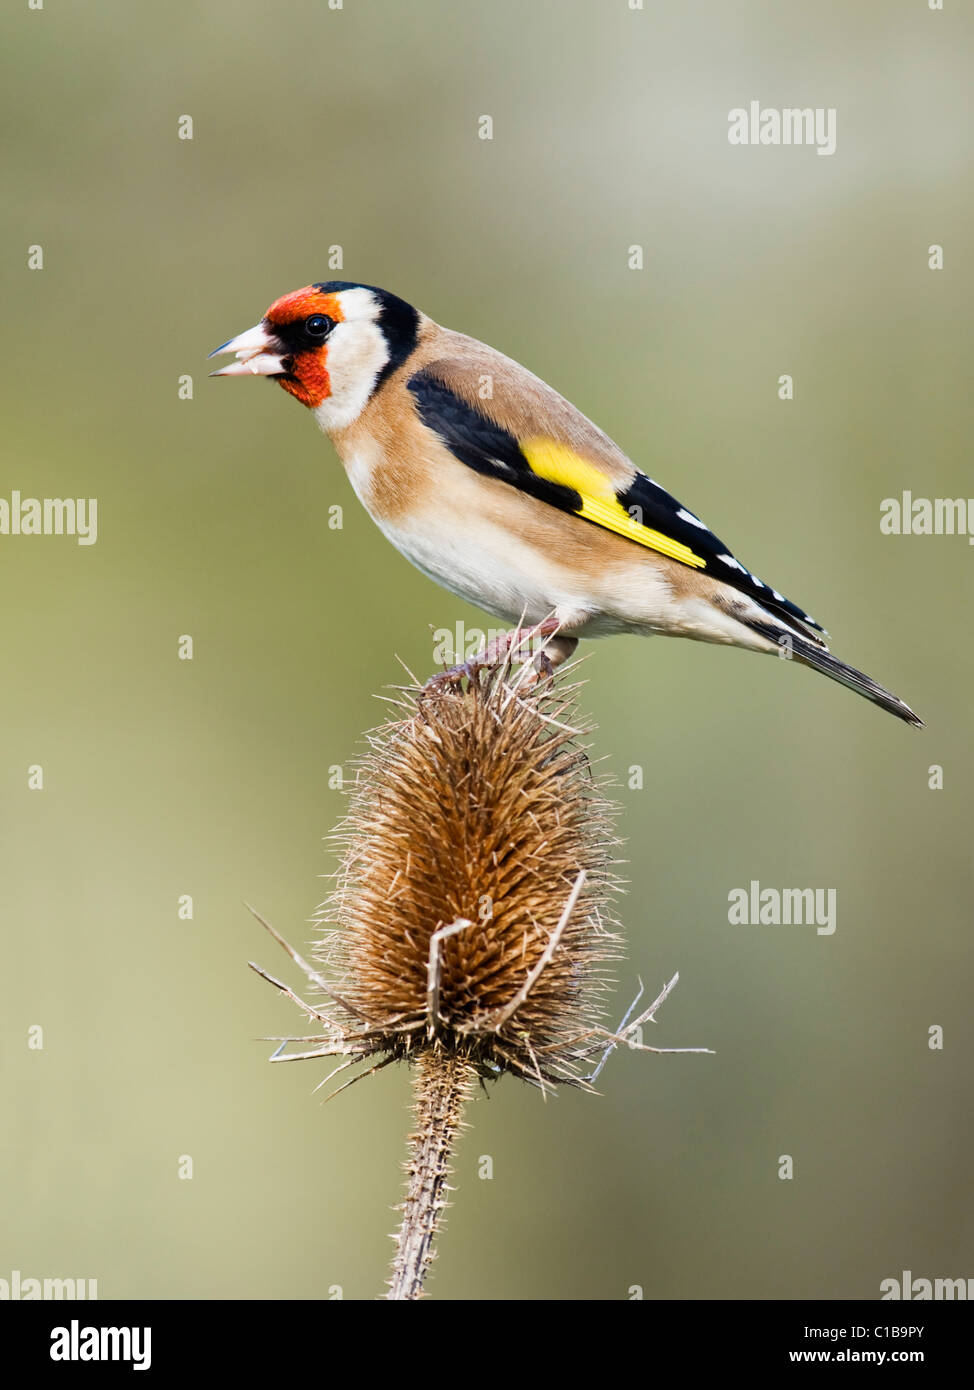 Goldfinch perched on dried Teasel Stock Photo